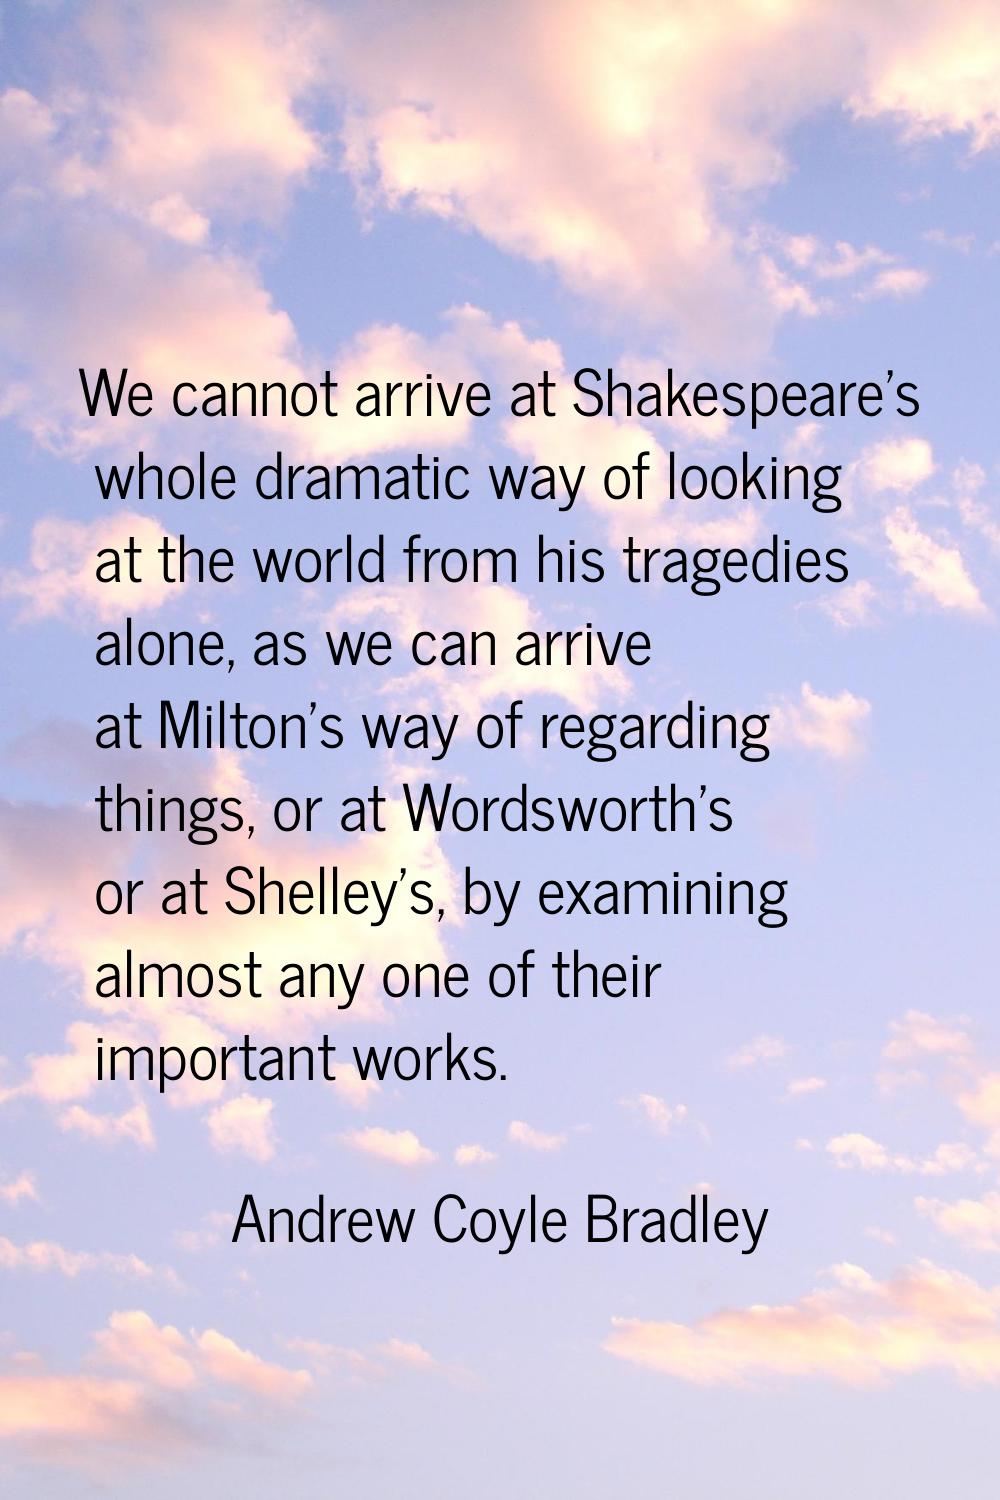 We cannot arrive at Shakespeare's whole dramatic way of looking at the world from his tragedies alo